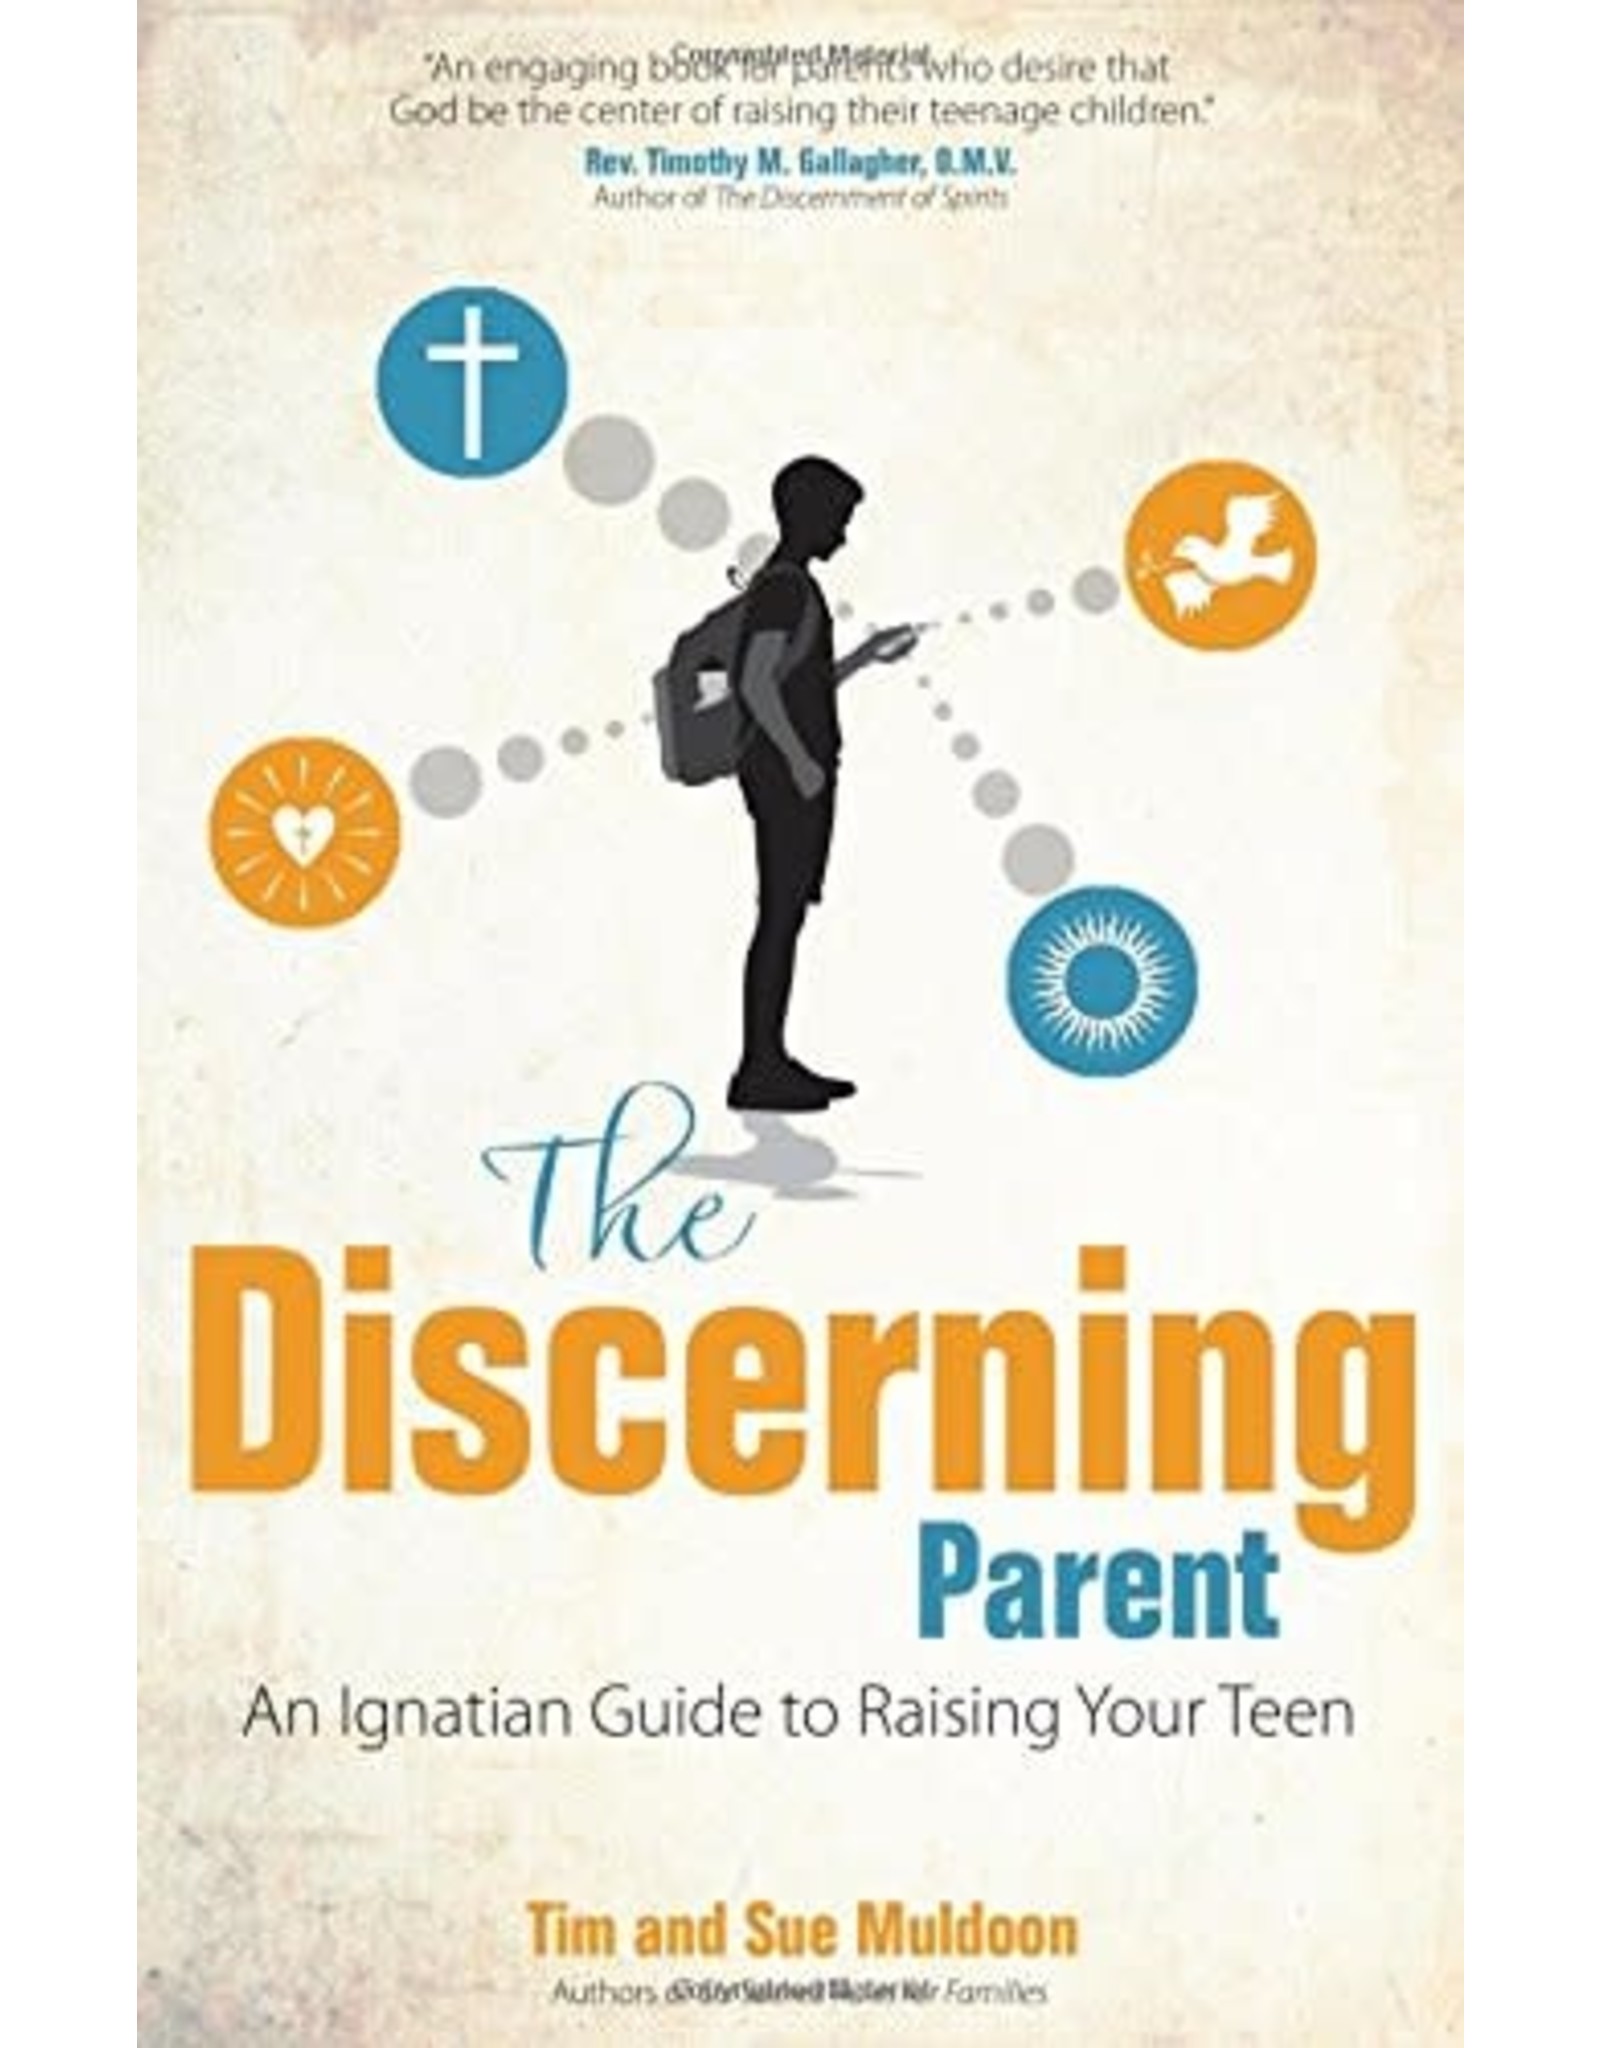 Ave Maria The Discerning Parent: An Ignatian Guide to Raising Your Teen